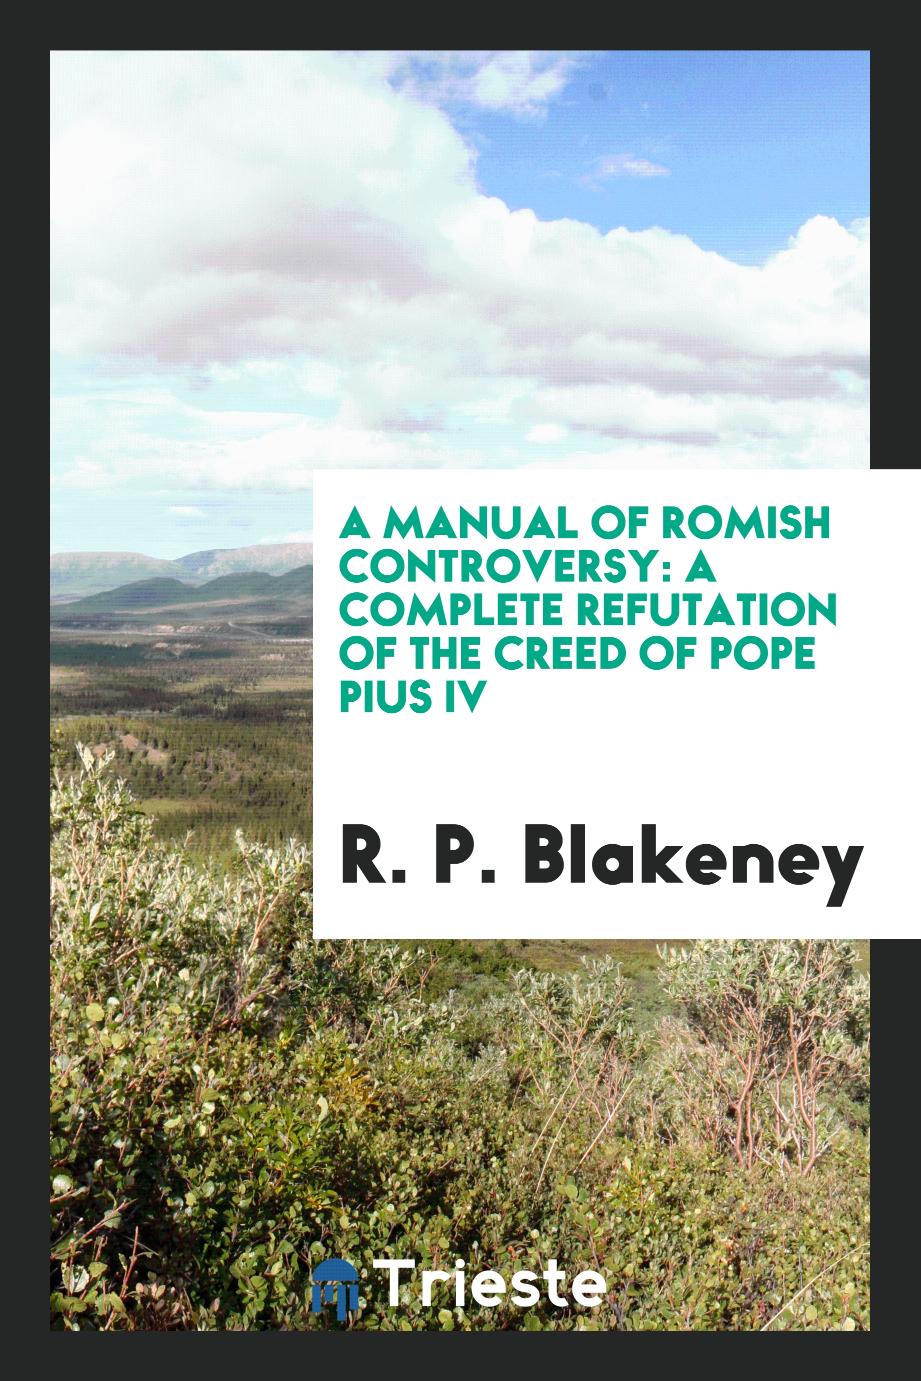 A Manual of Romish Controversy: A Complete Refutation of the Creed of Pope Pius IV